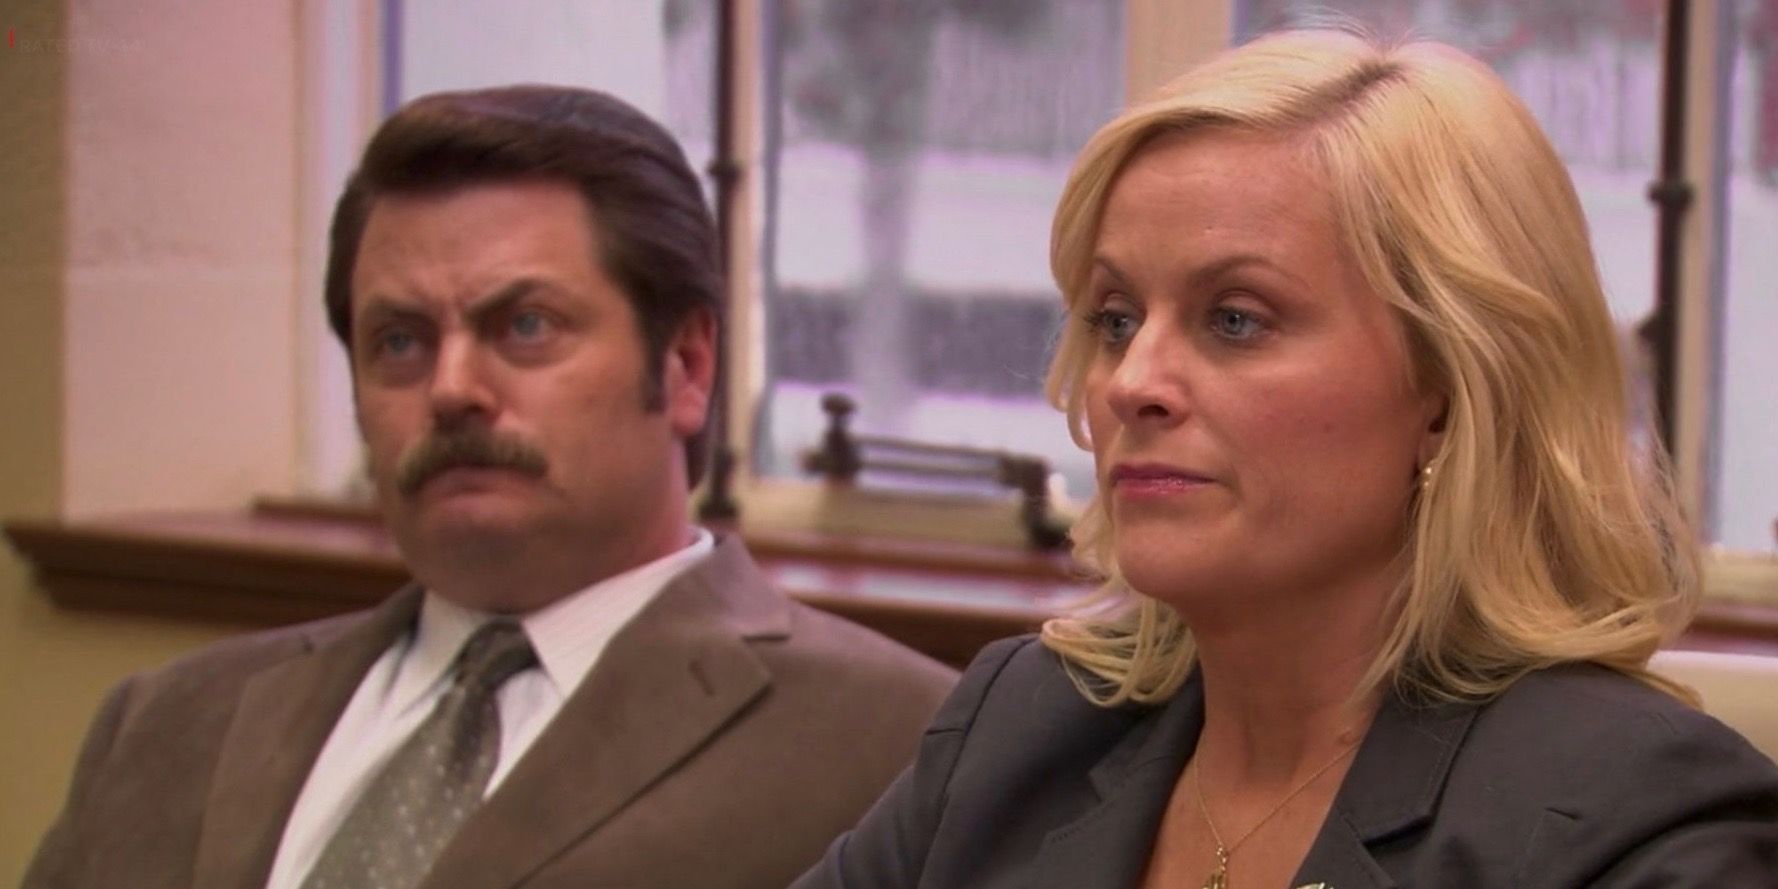 Parks & Rec: Ron Swanson’s 10 Most Badass Quotes